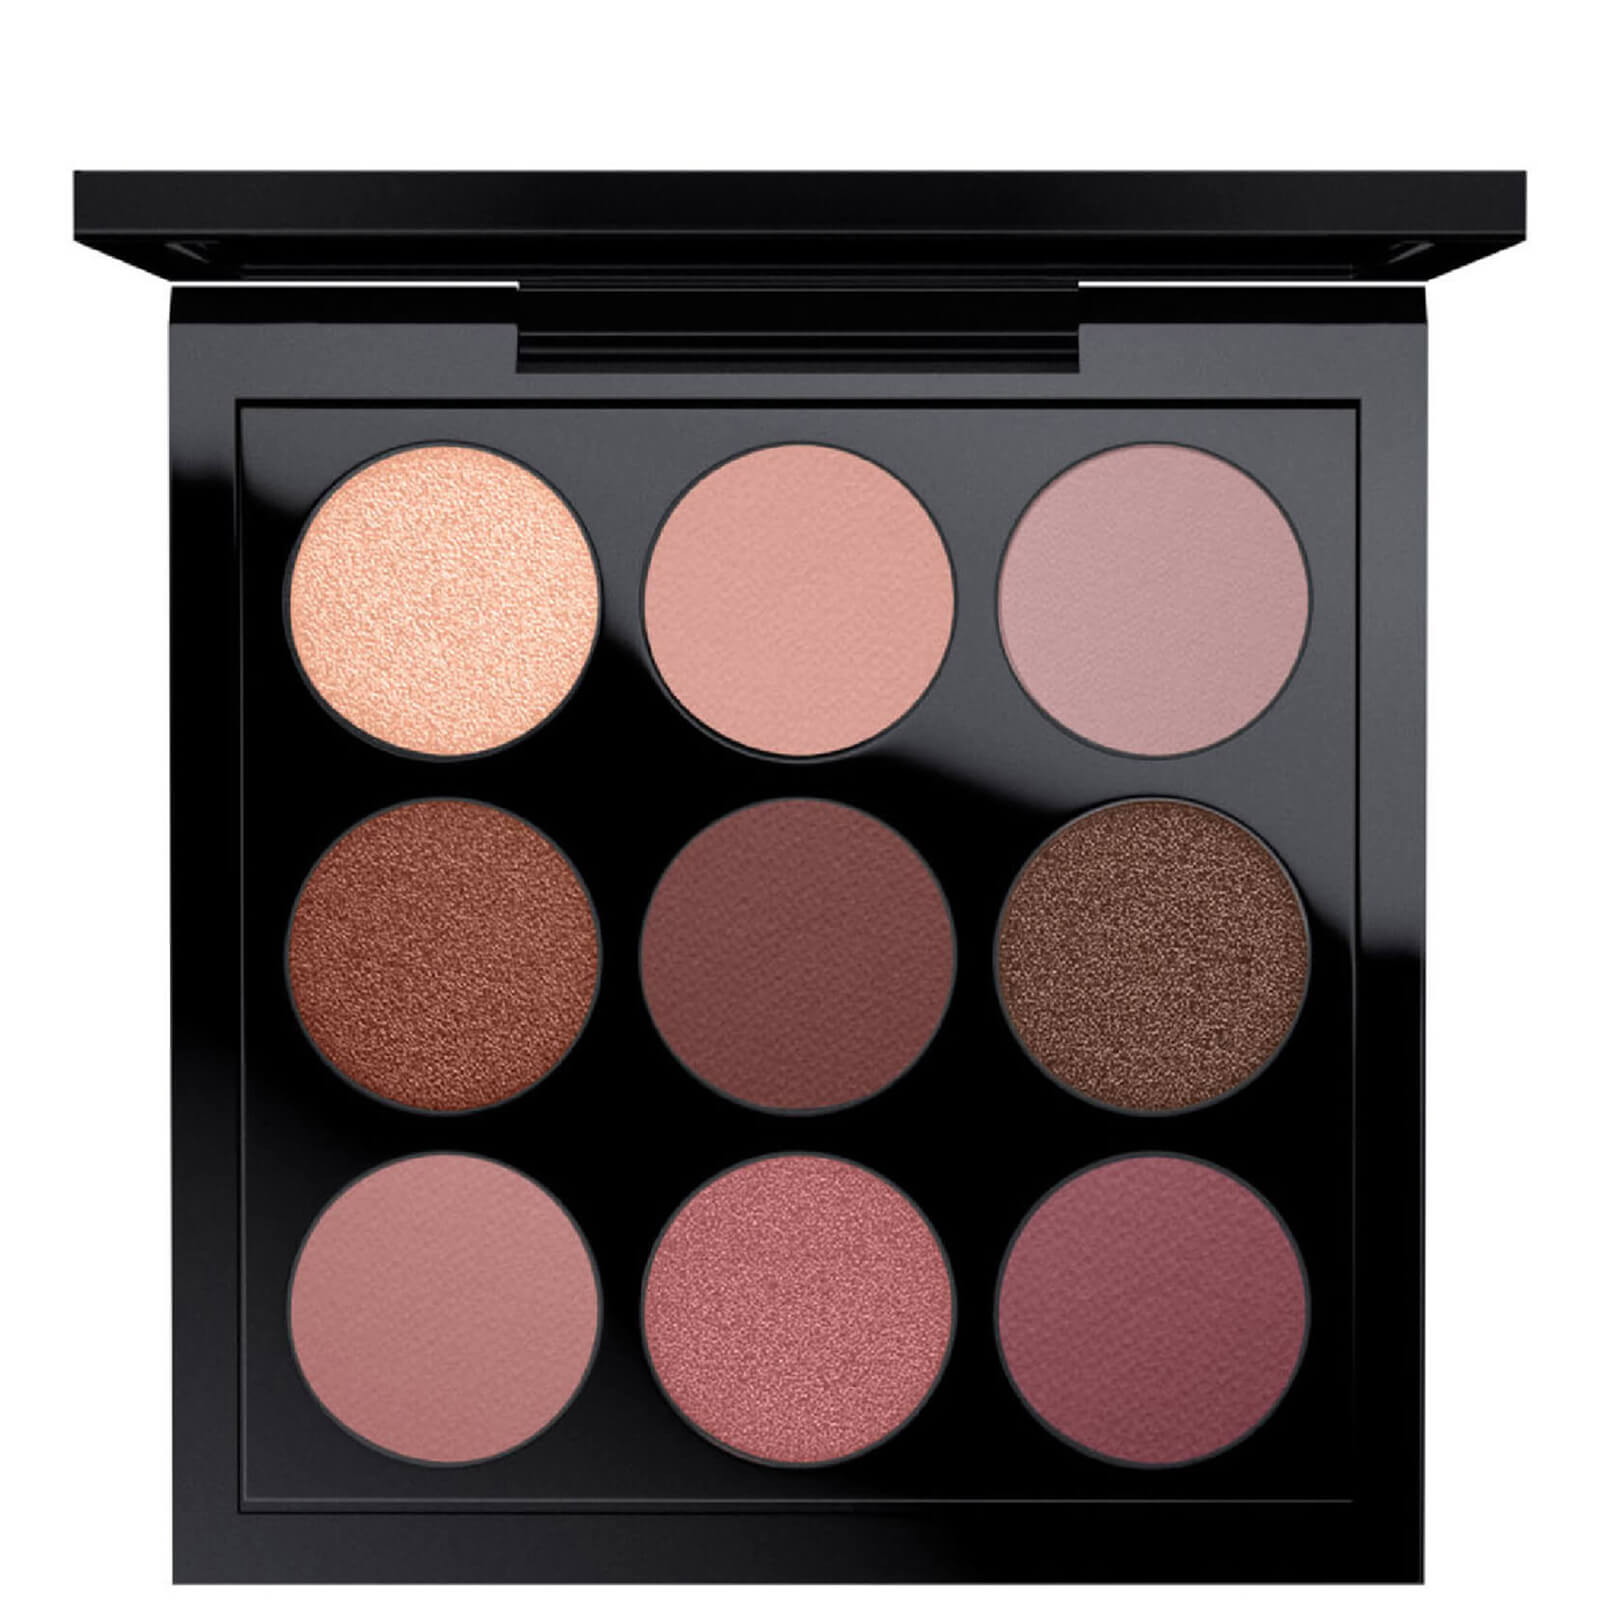 Image of Mac Ombretto x 9 - Burgundy